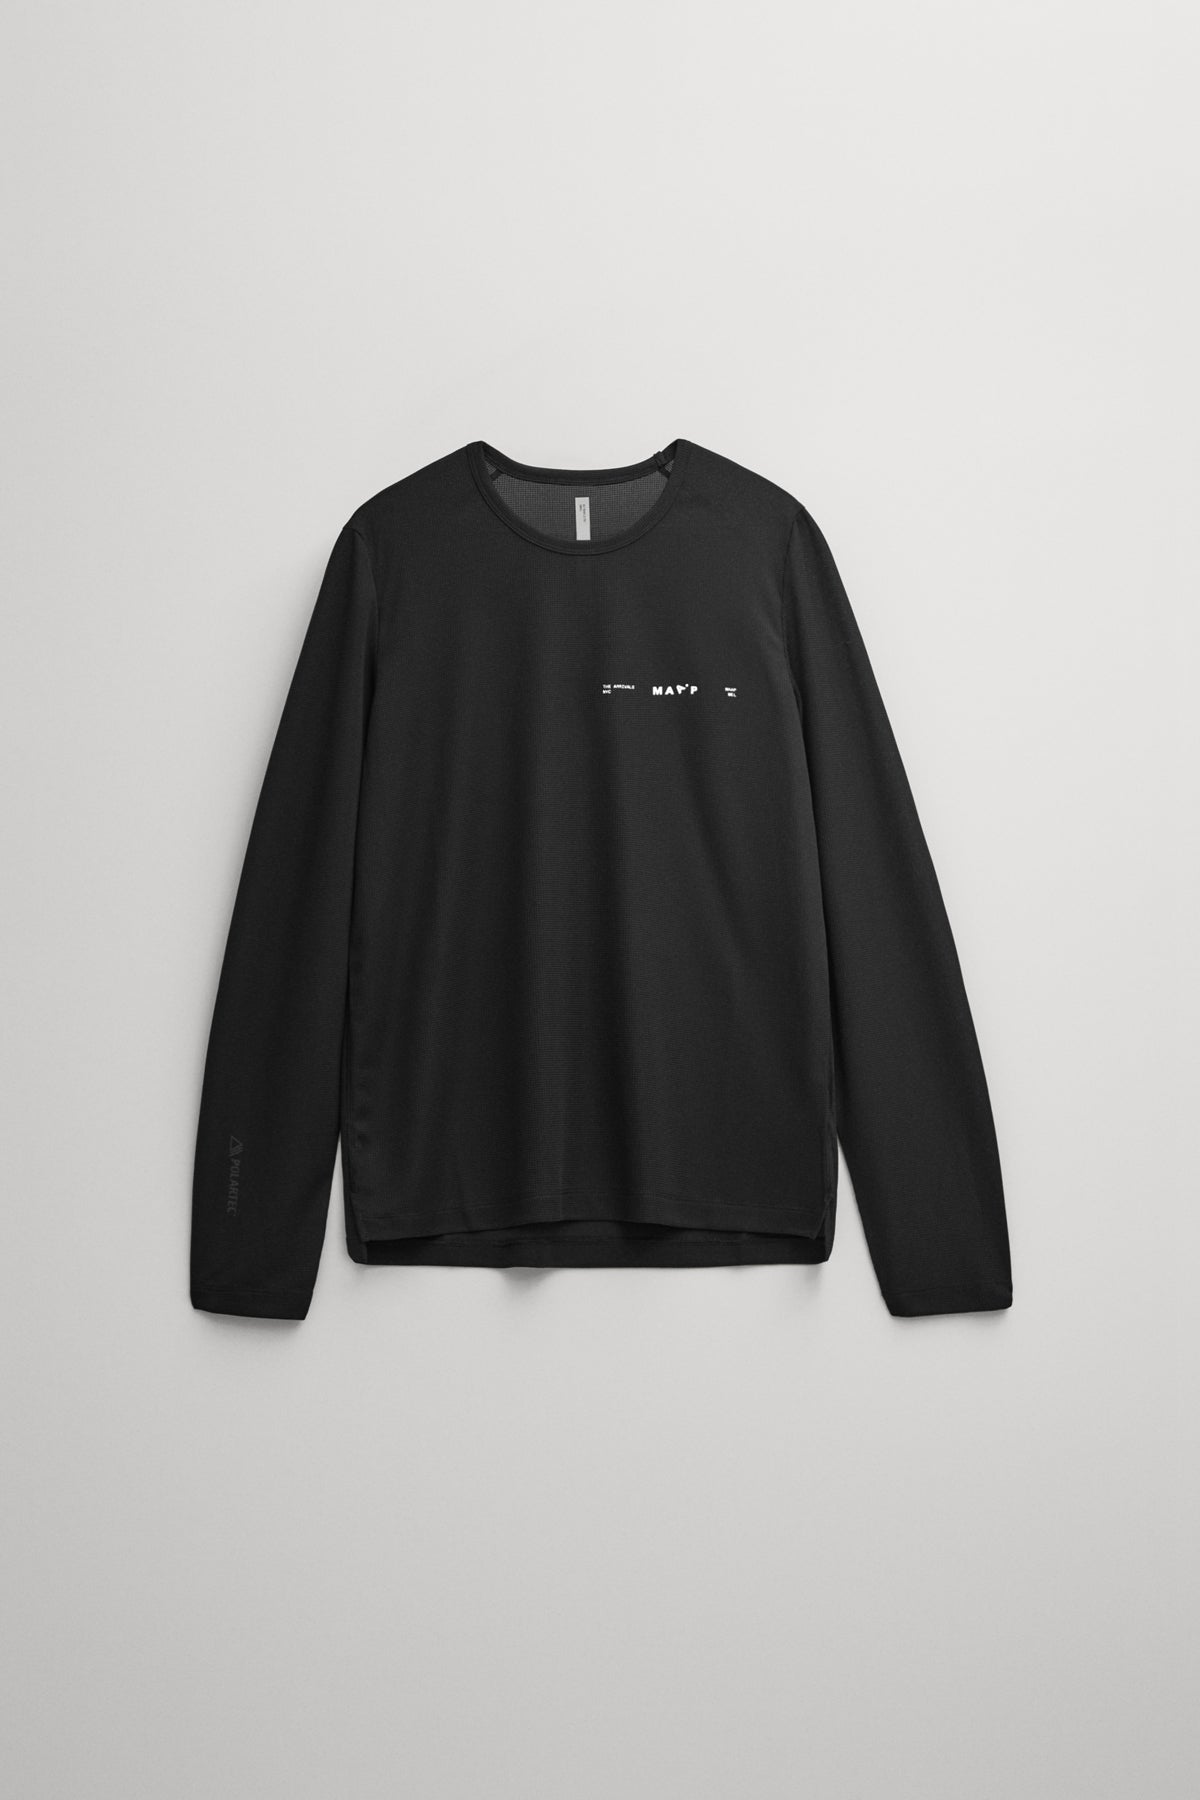 THE ARRIVALS + MAAP THE ARRIVALS ALT ROAD LONG SLEEVE